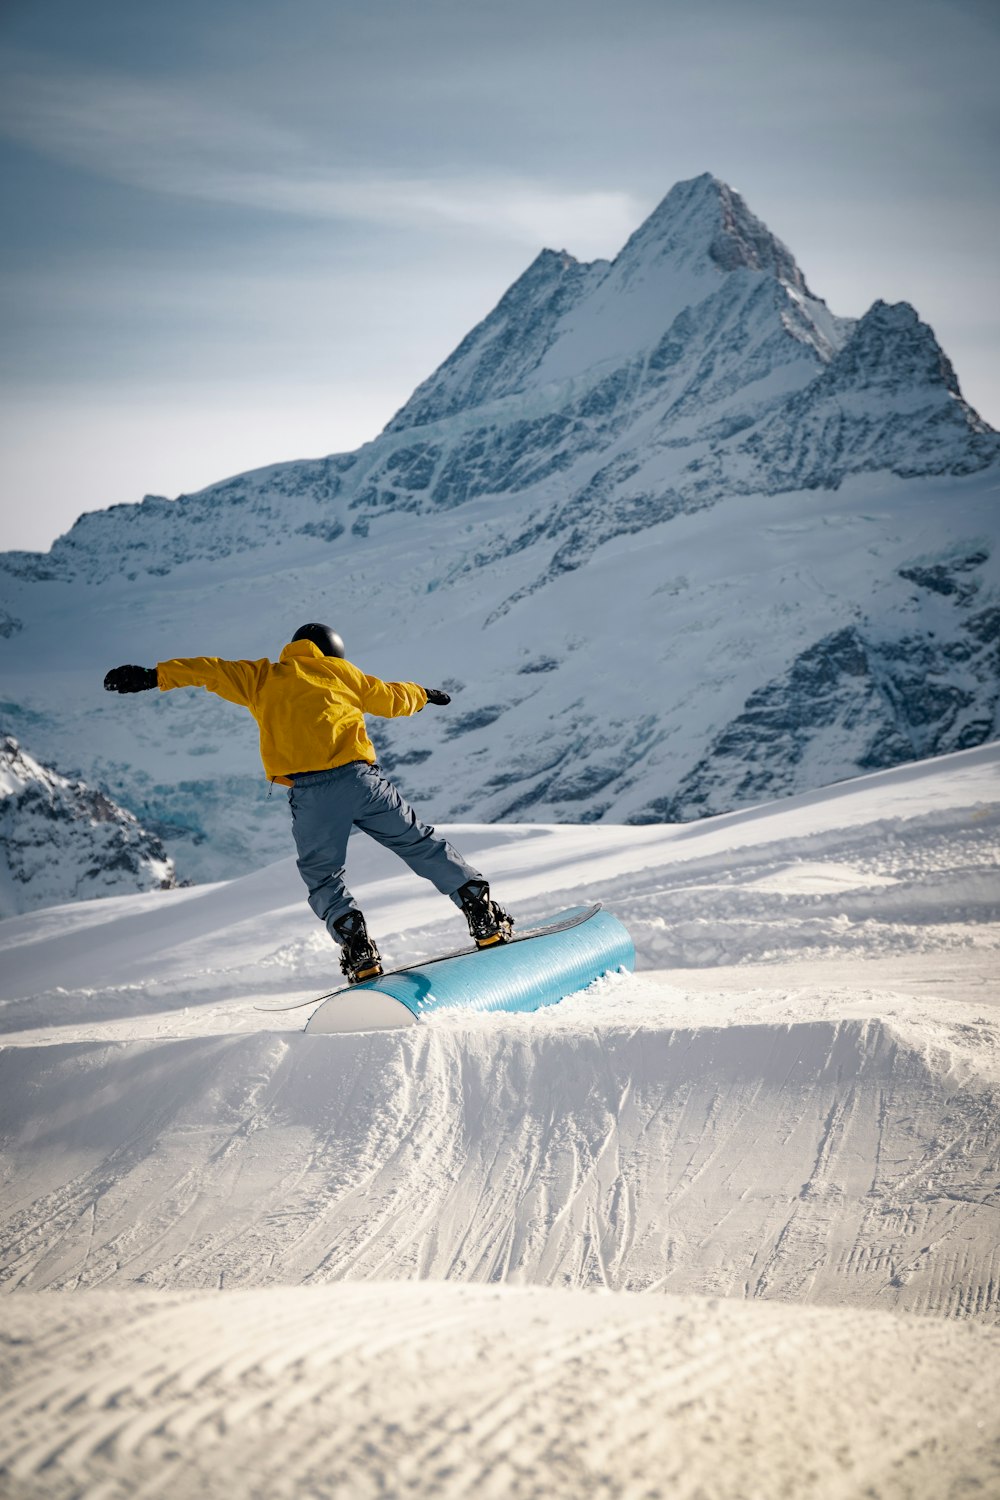 man in yellow jacket and blue pants riding blue snowboard on snow covered mountain during daytime